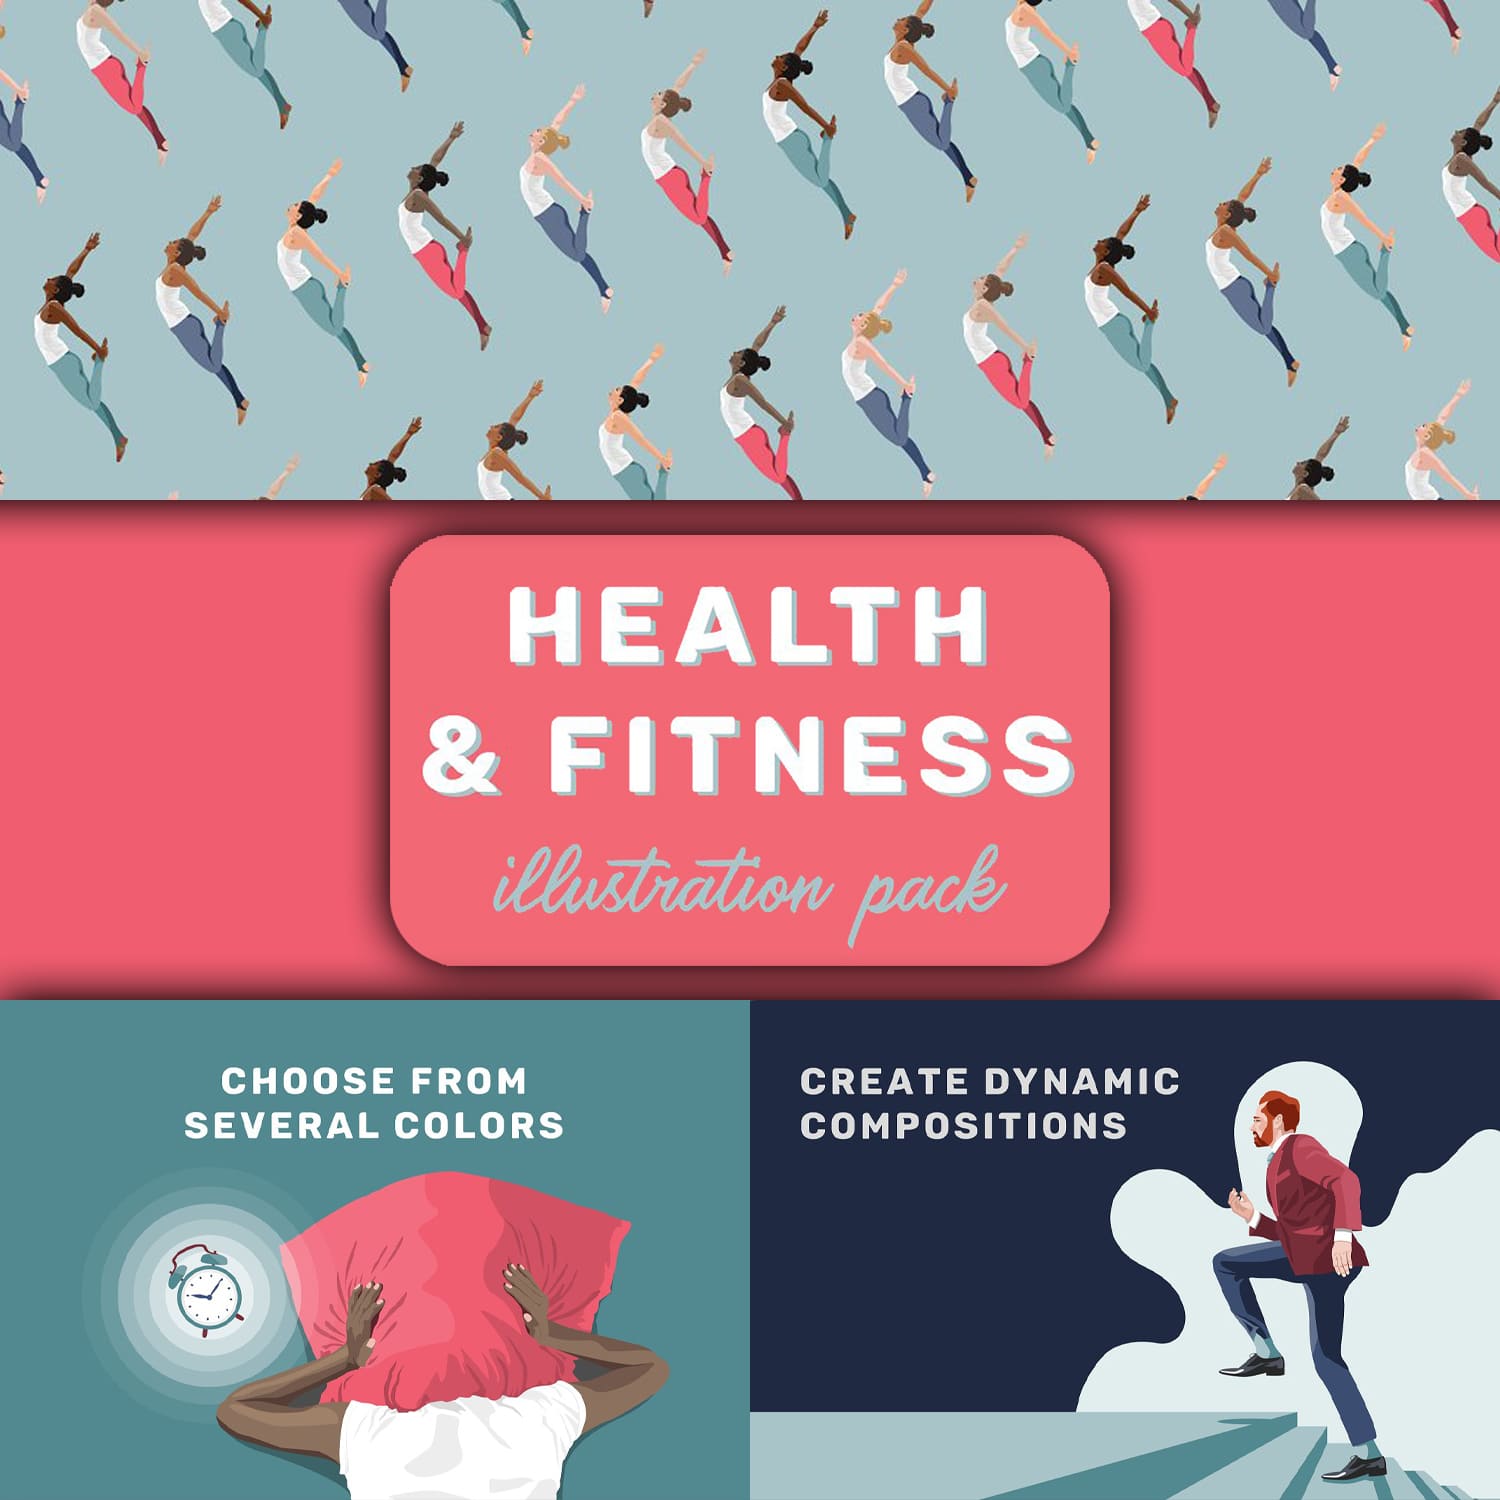 Health & Fitness Illustration Pack created by The Minimalist.